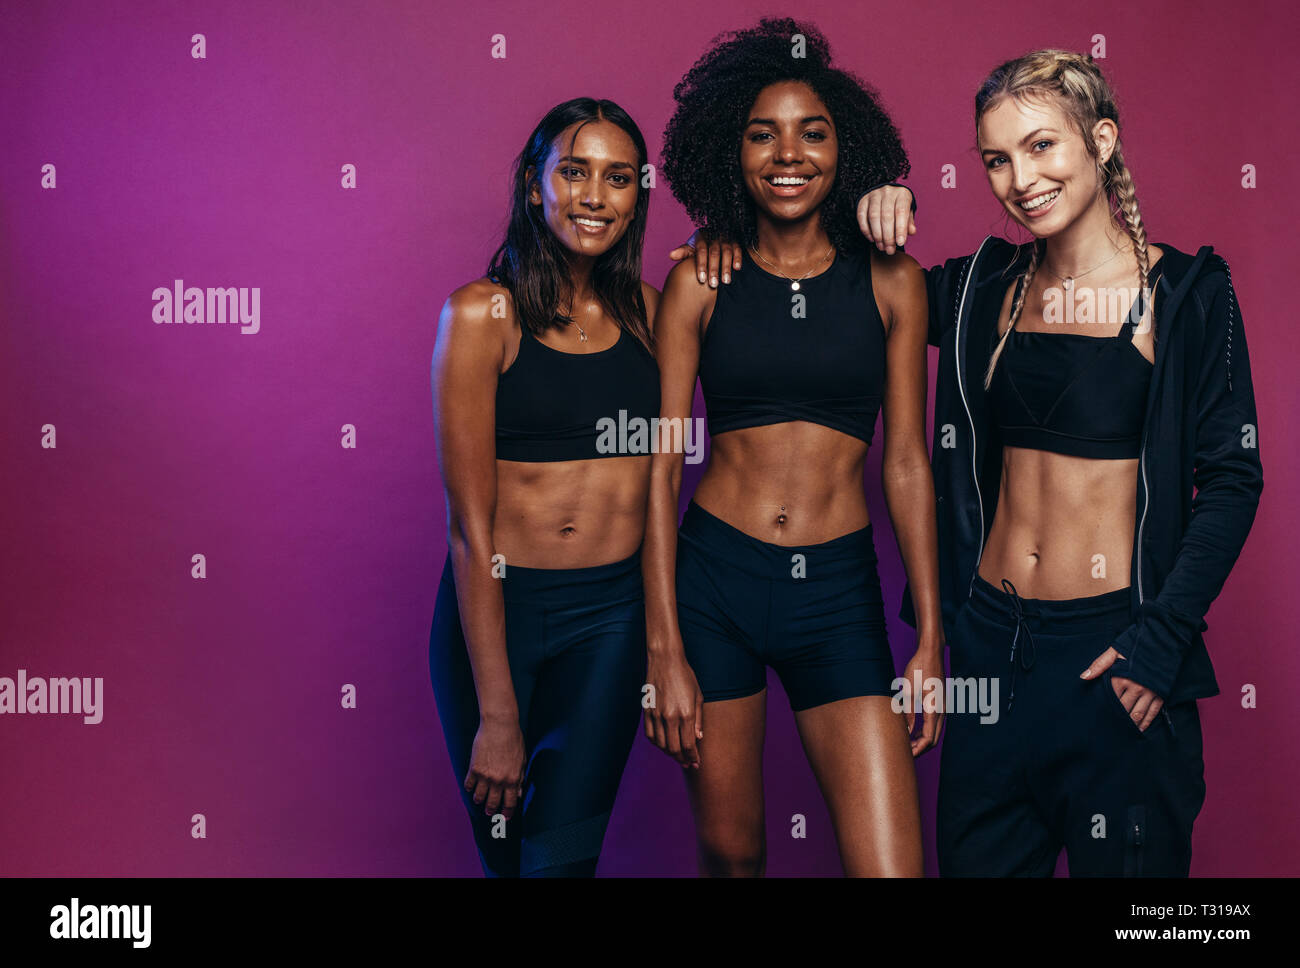 Multi-ethnic fitness women together against colored background. Diverse ...